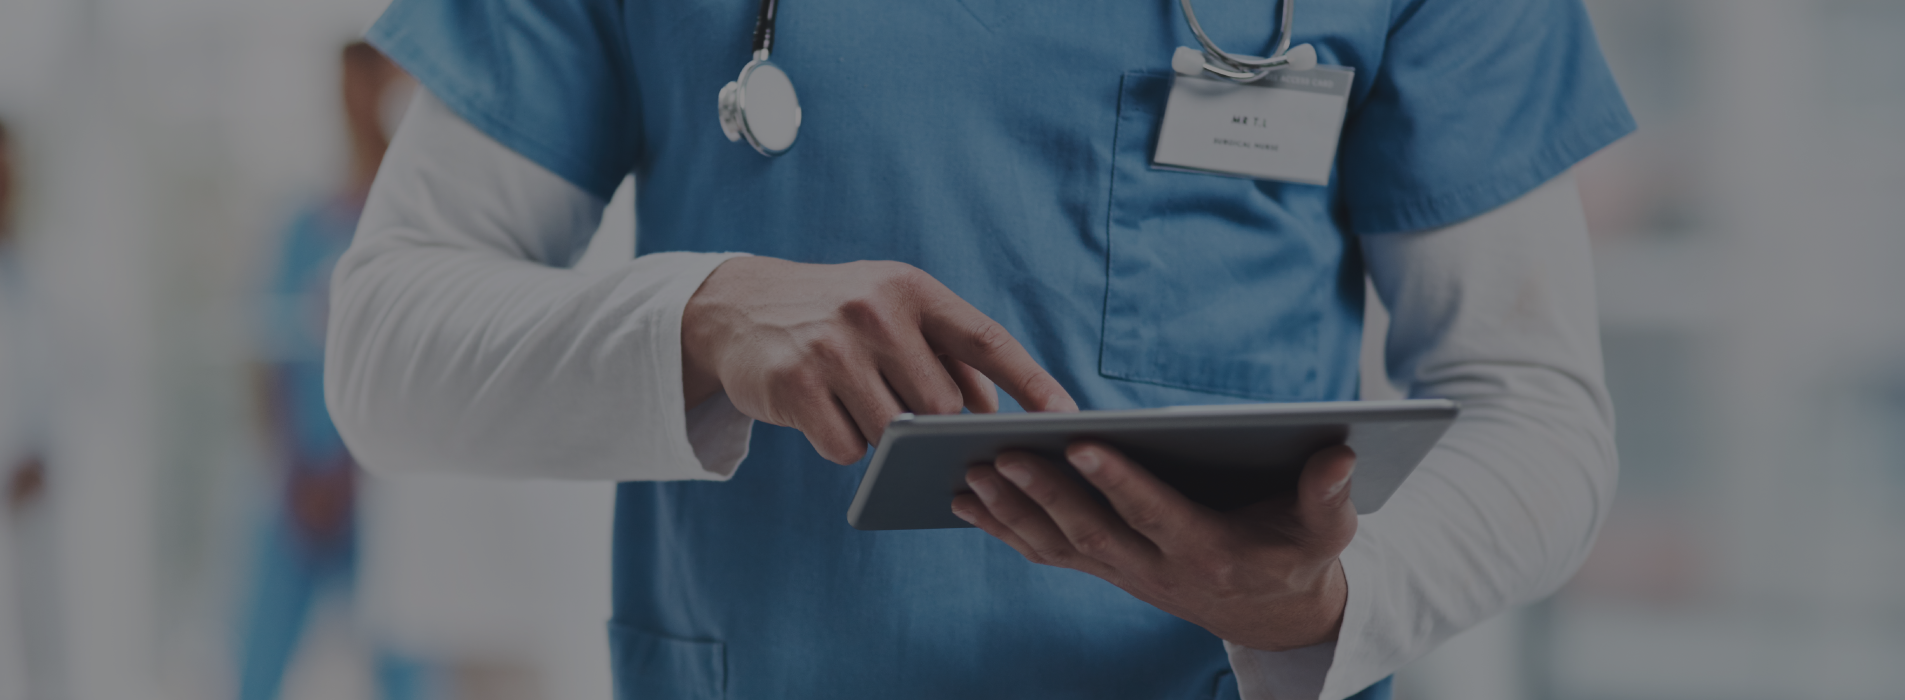 Close up of a skilled nursing provider's hands holding and using a tablet device in a medical environment